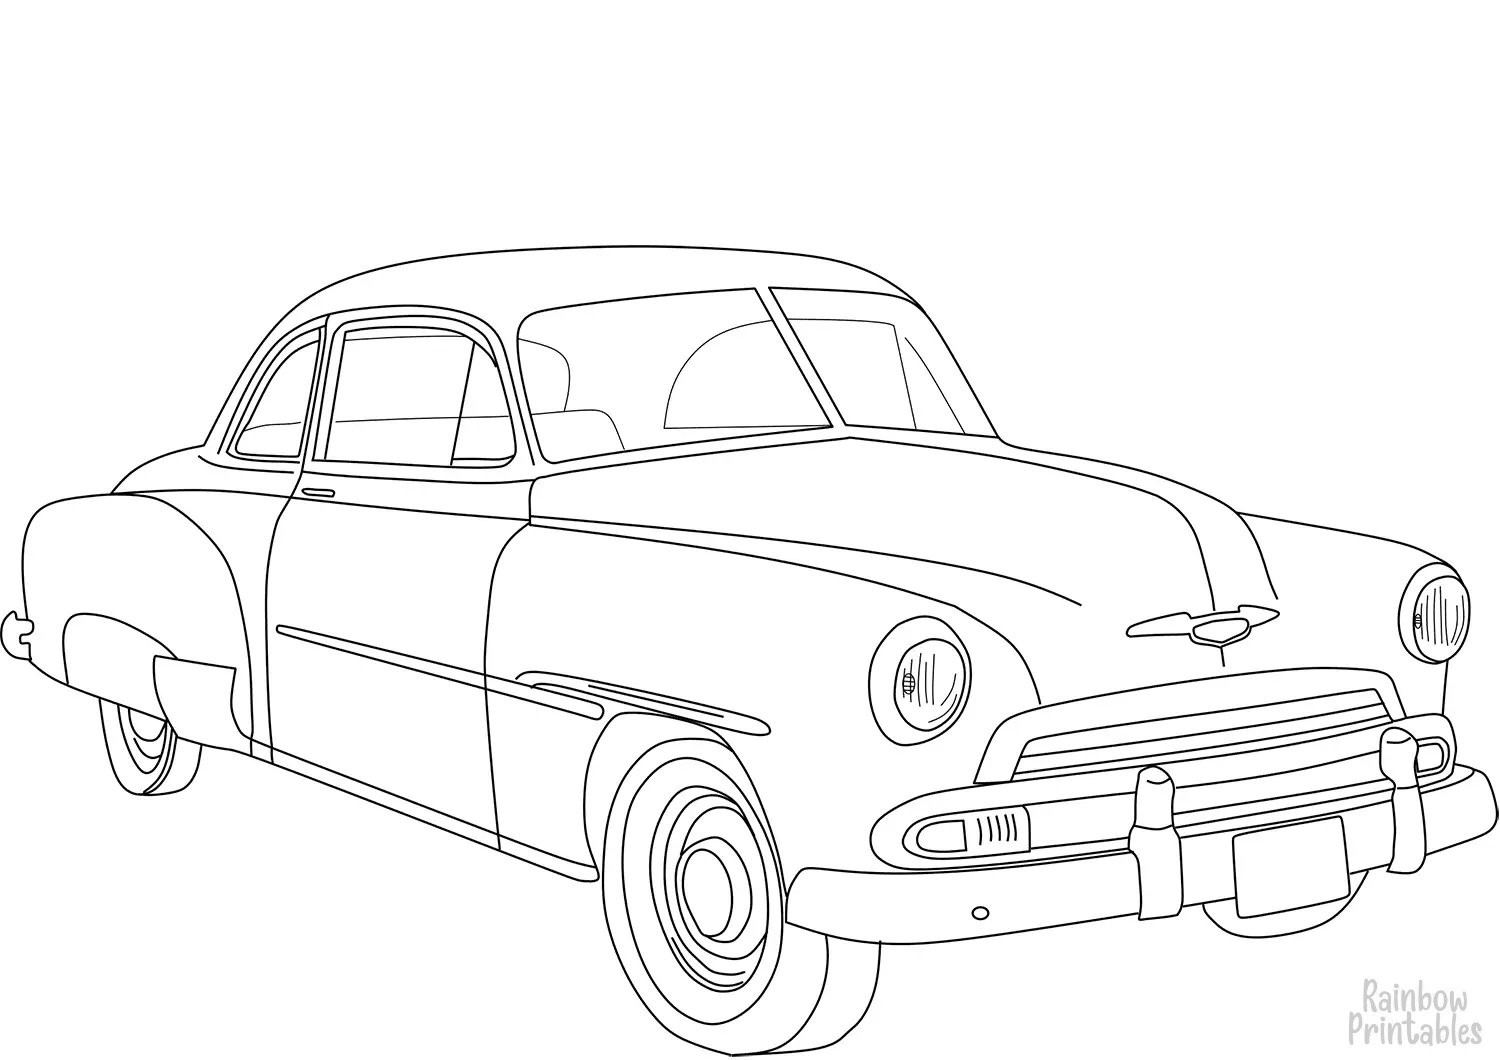 FORD PICKUP 1951 CHEVROLET DELUXE COUPE Clipart Coloring Pages for Kids Adults Art Activities Line Art